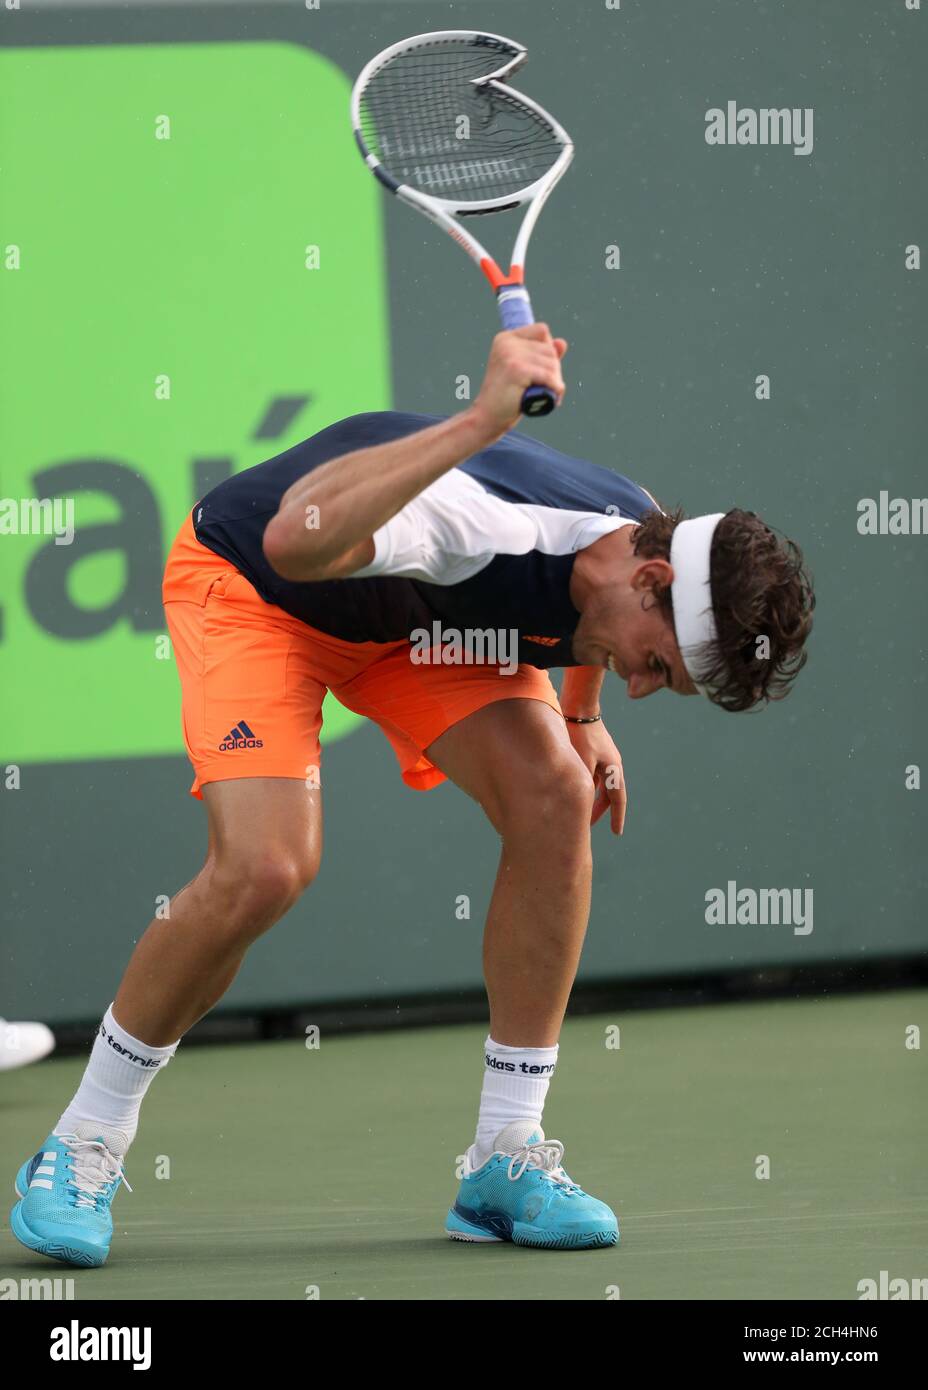 KEY BISCAYNE, FL - MARCH 25: Dominic Thiem breaks his racket on day 6 of  the Miami Open at Crandon Park Tennis Center on March 25, 2017 in Key  Biscayne, Florida People: